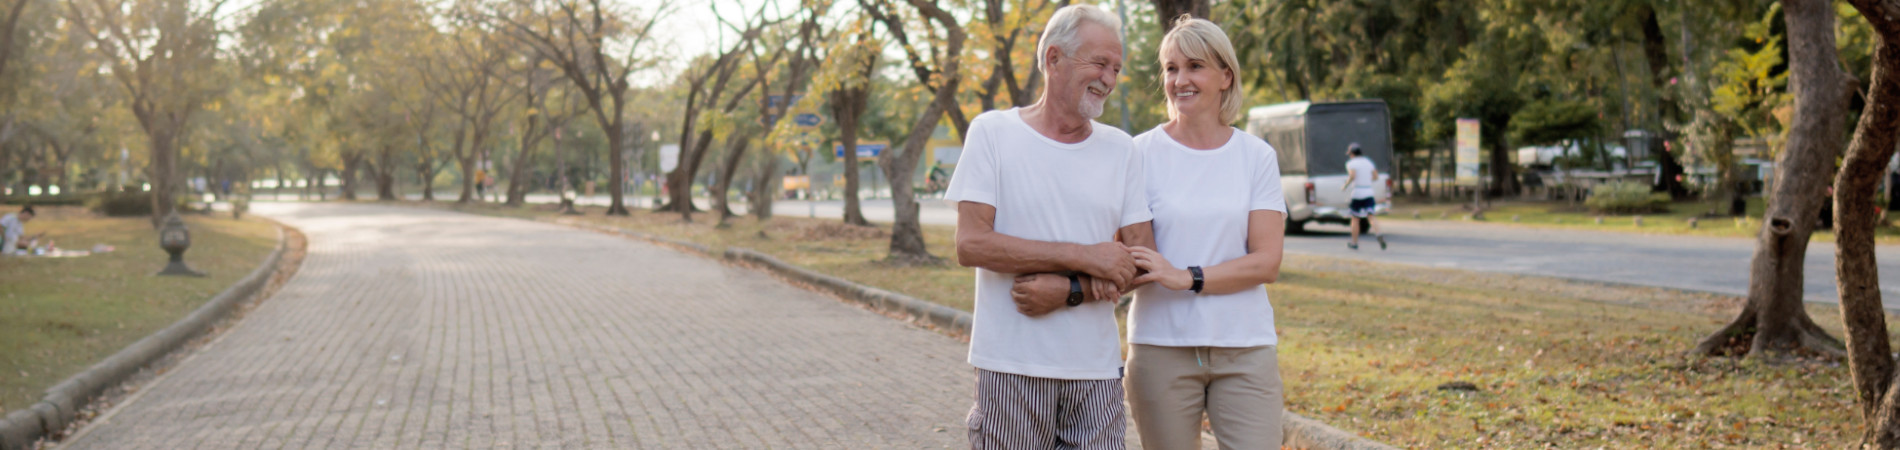 Older couple smiling and going on a walk in the park